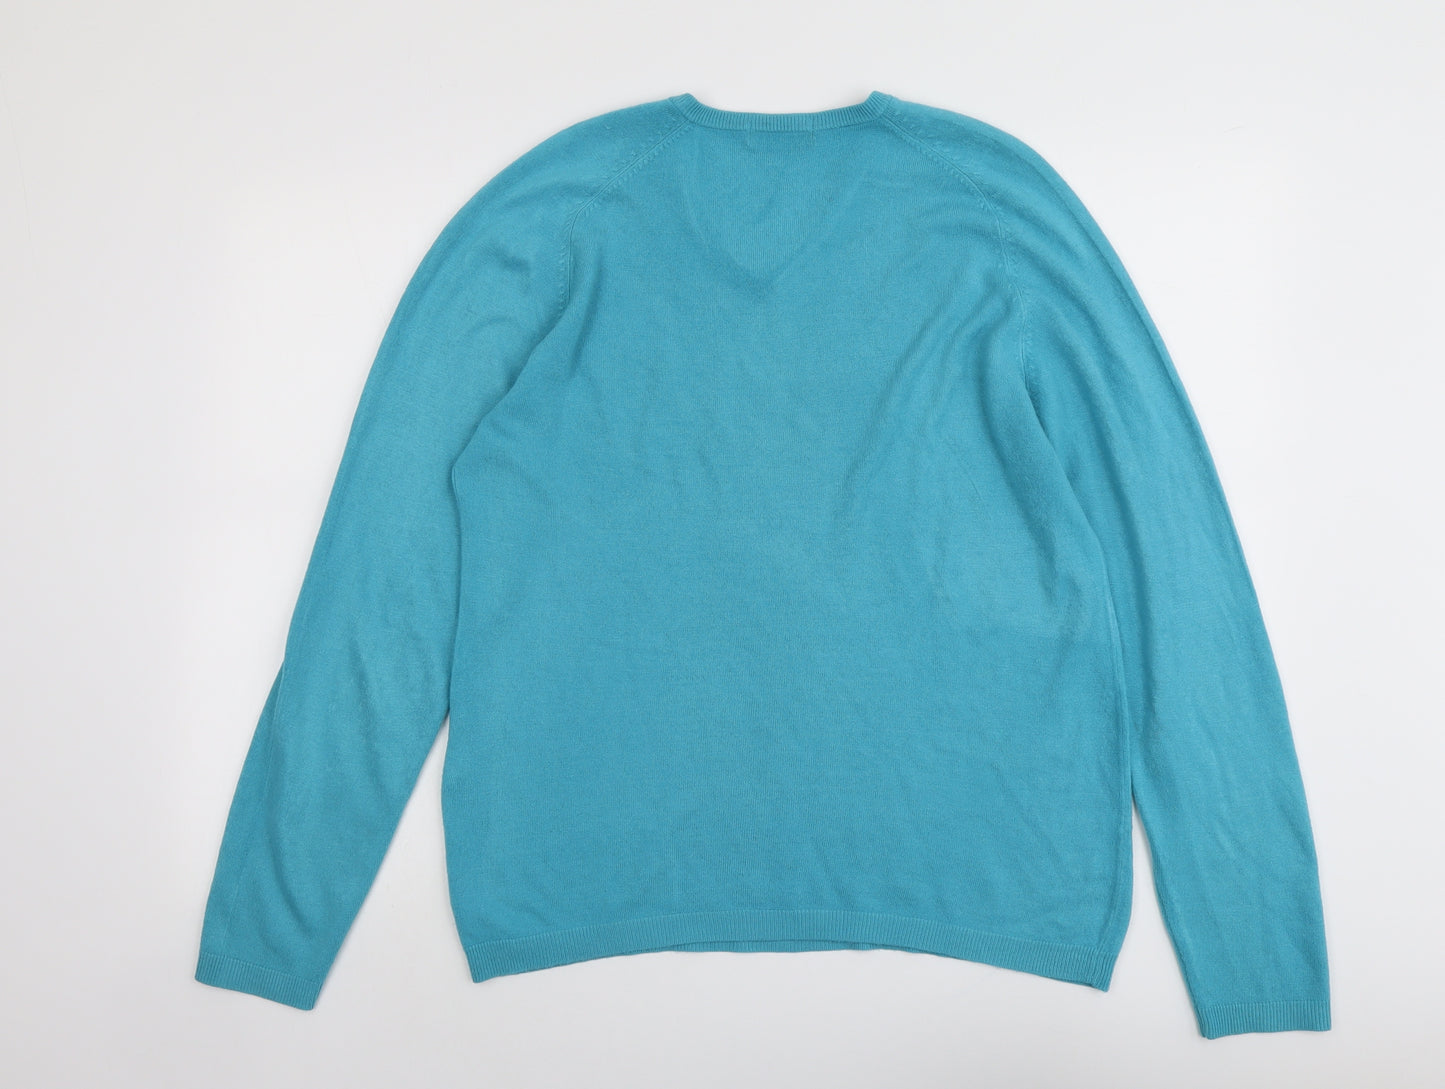 Autograph Mens Blue V-Neck Acrylic Pullover Jumper Size S Long Sleeve